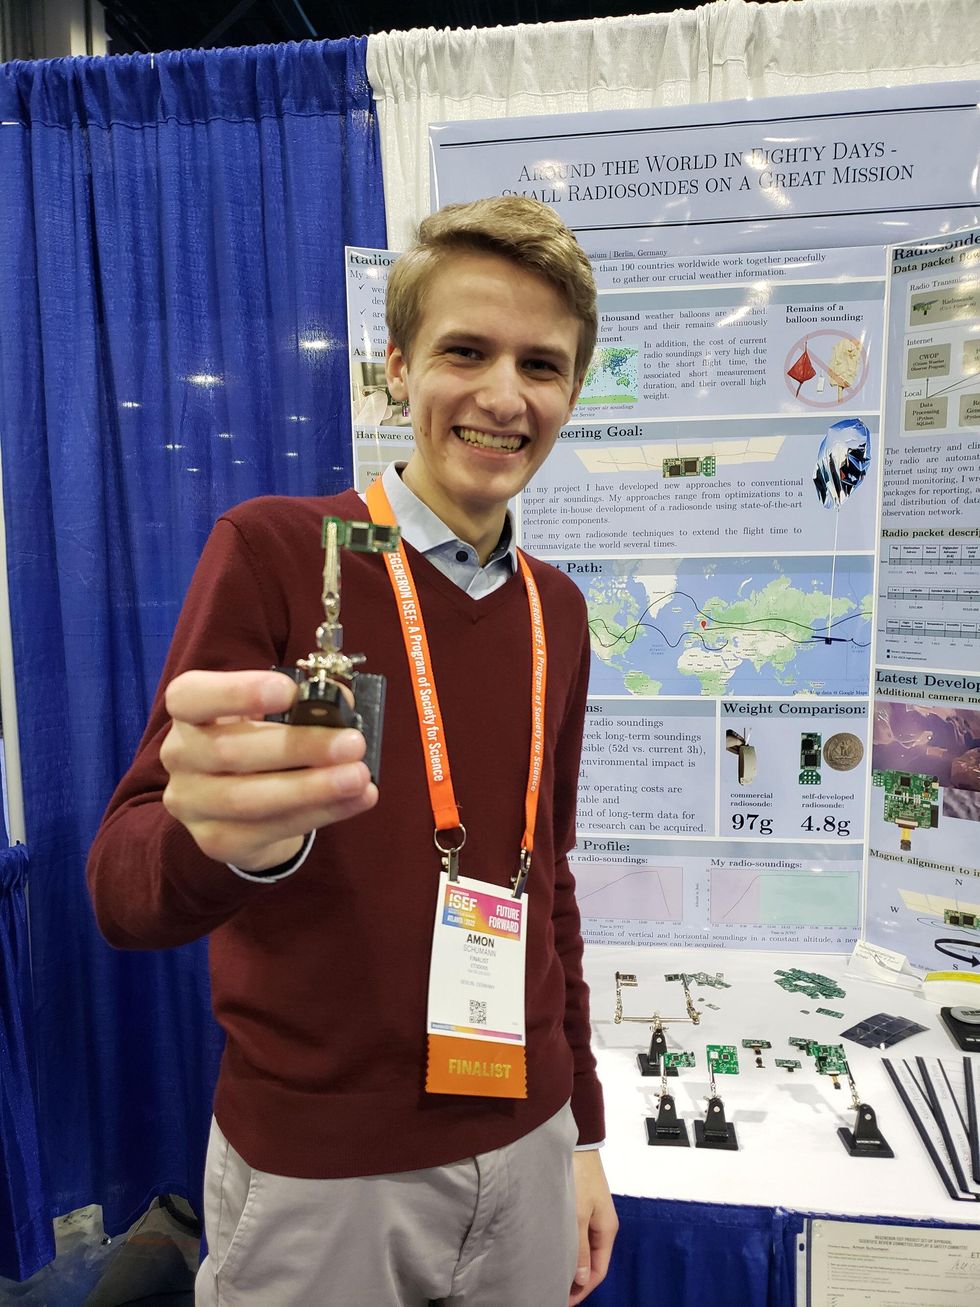 A young man is holding a device called a radiosonde.